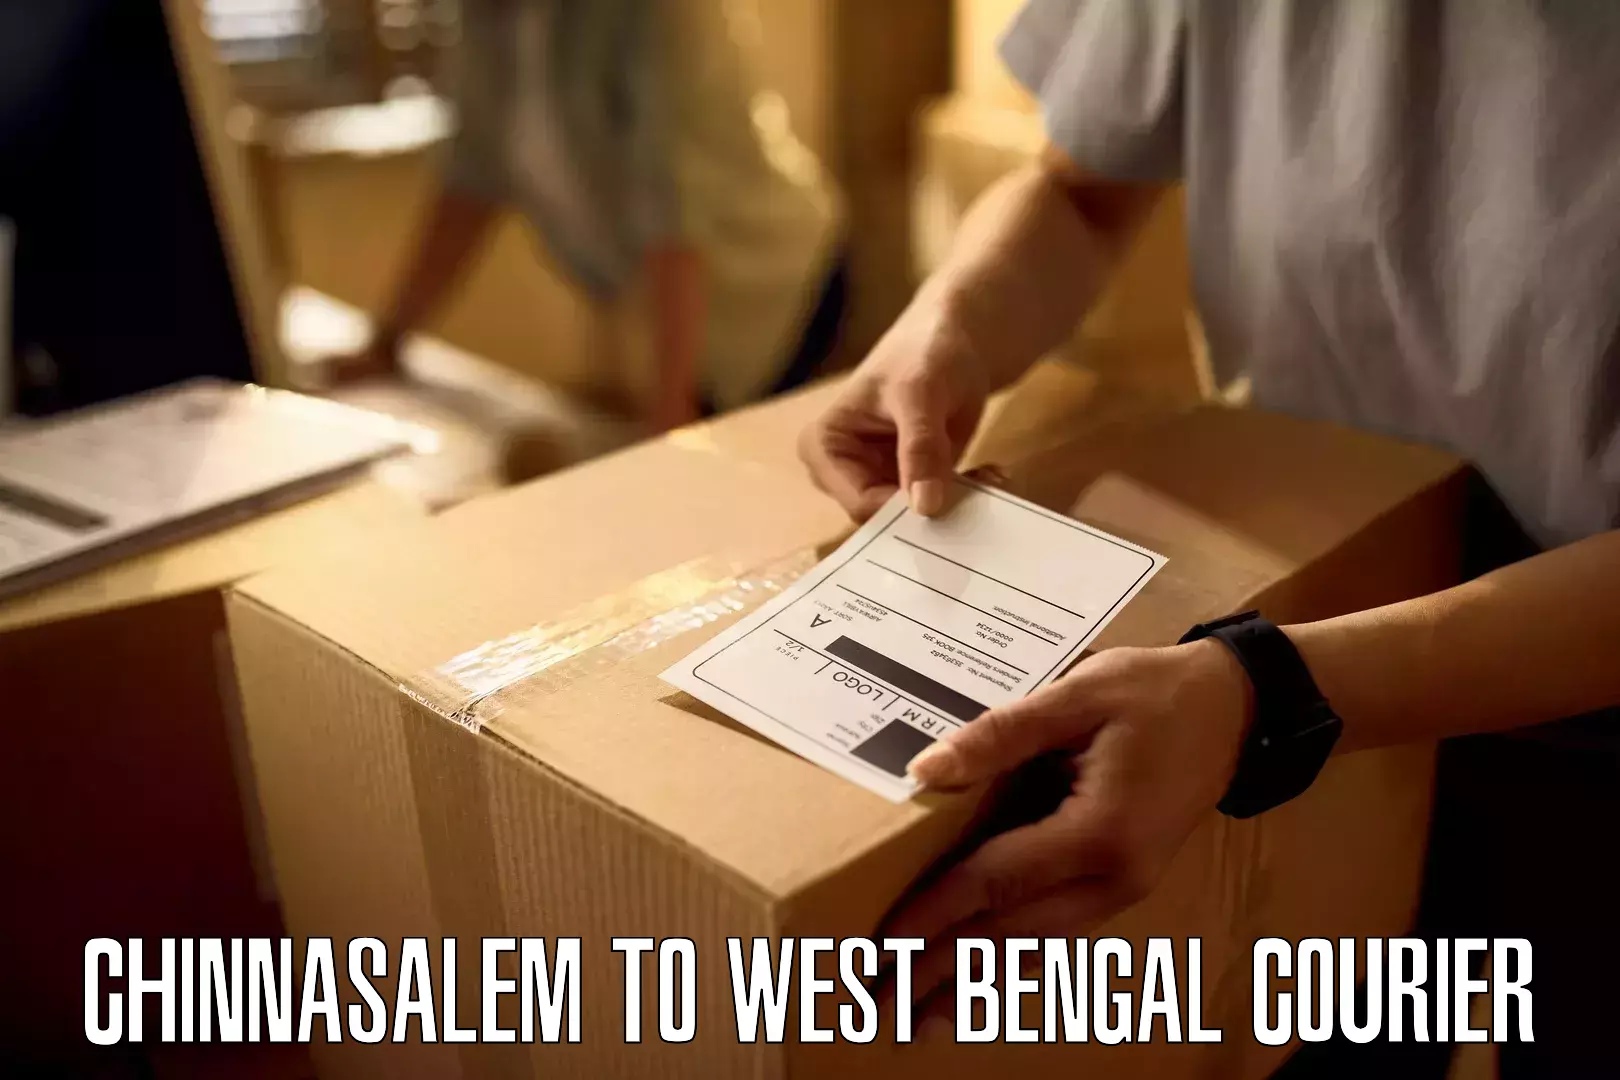 Cargo delivery service Chinnasalem to West Bengal